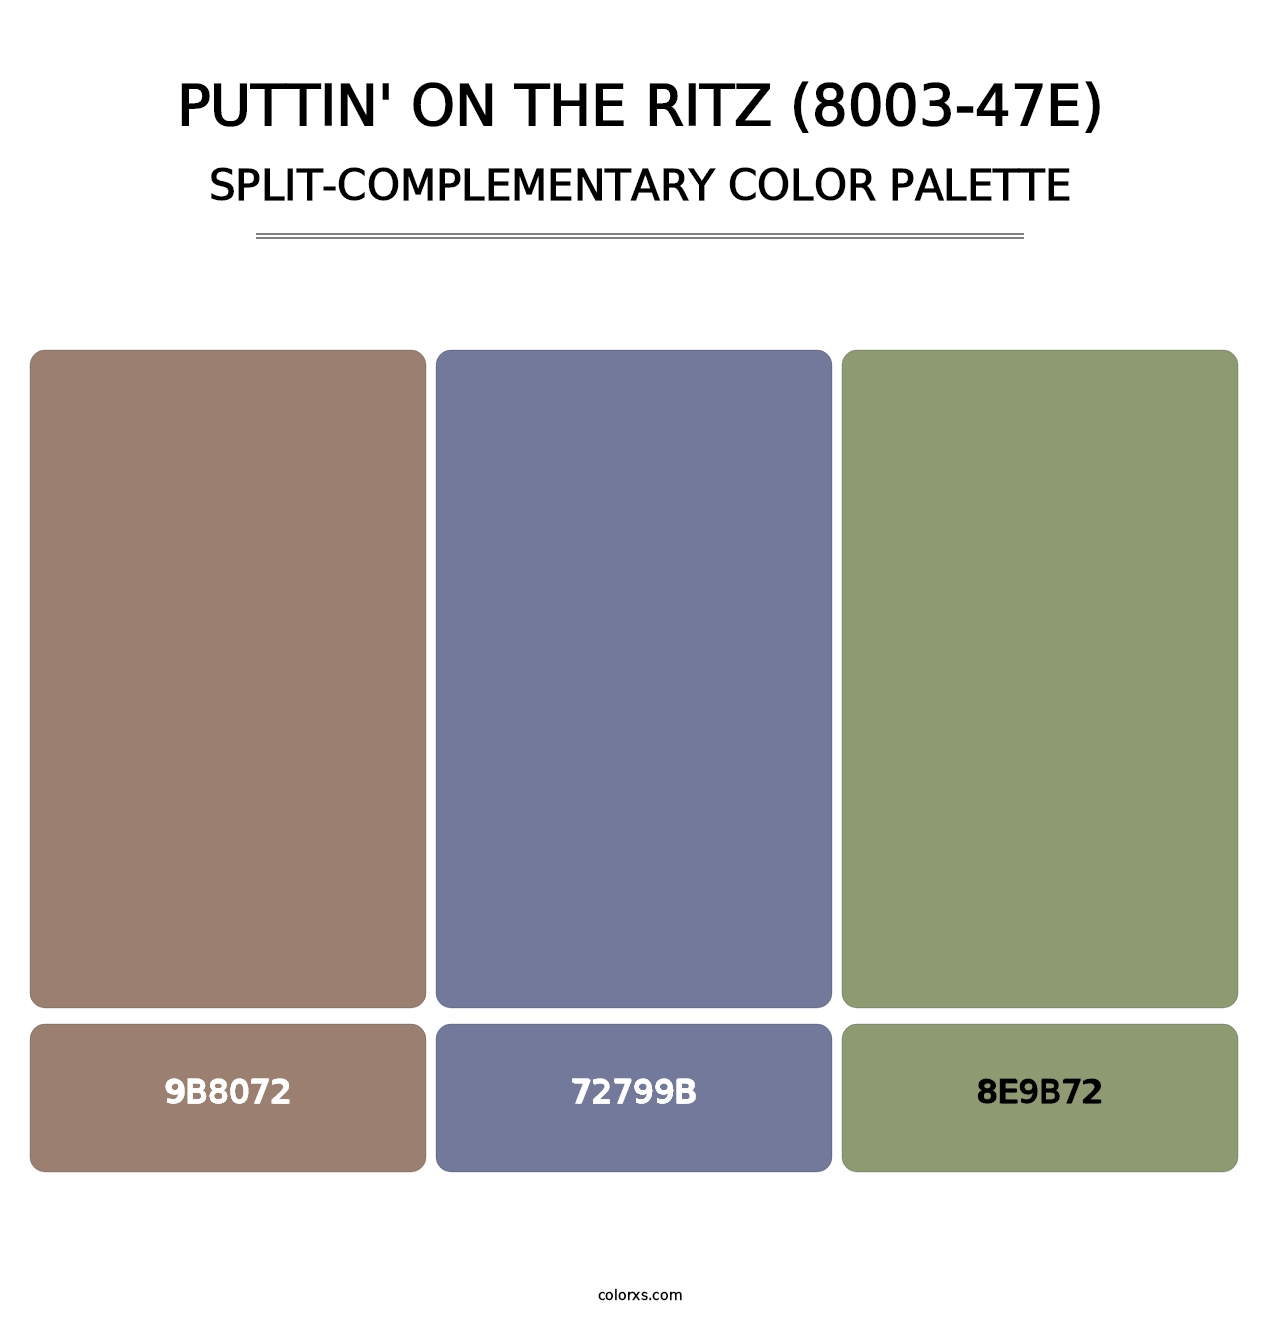 Puttin' on the Ritz (8003-47E) - Split-Complementary Color Palette